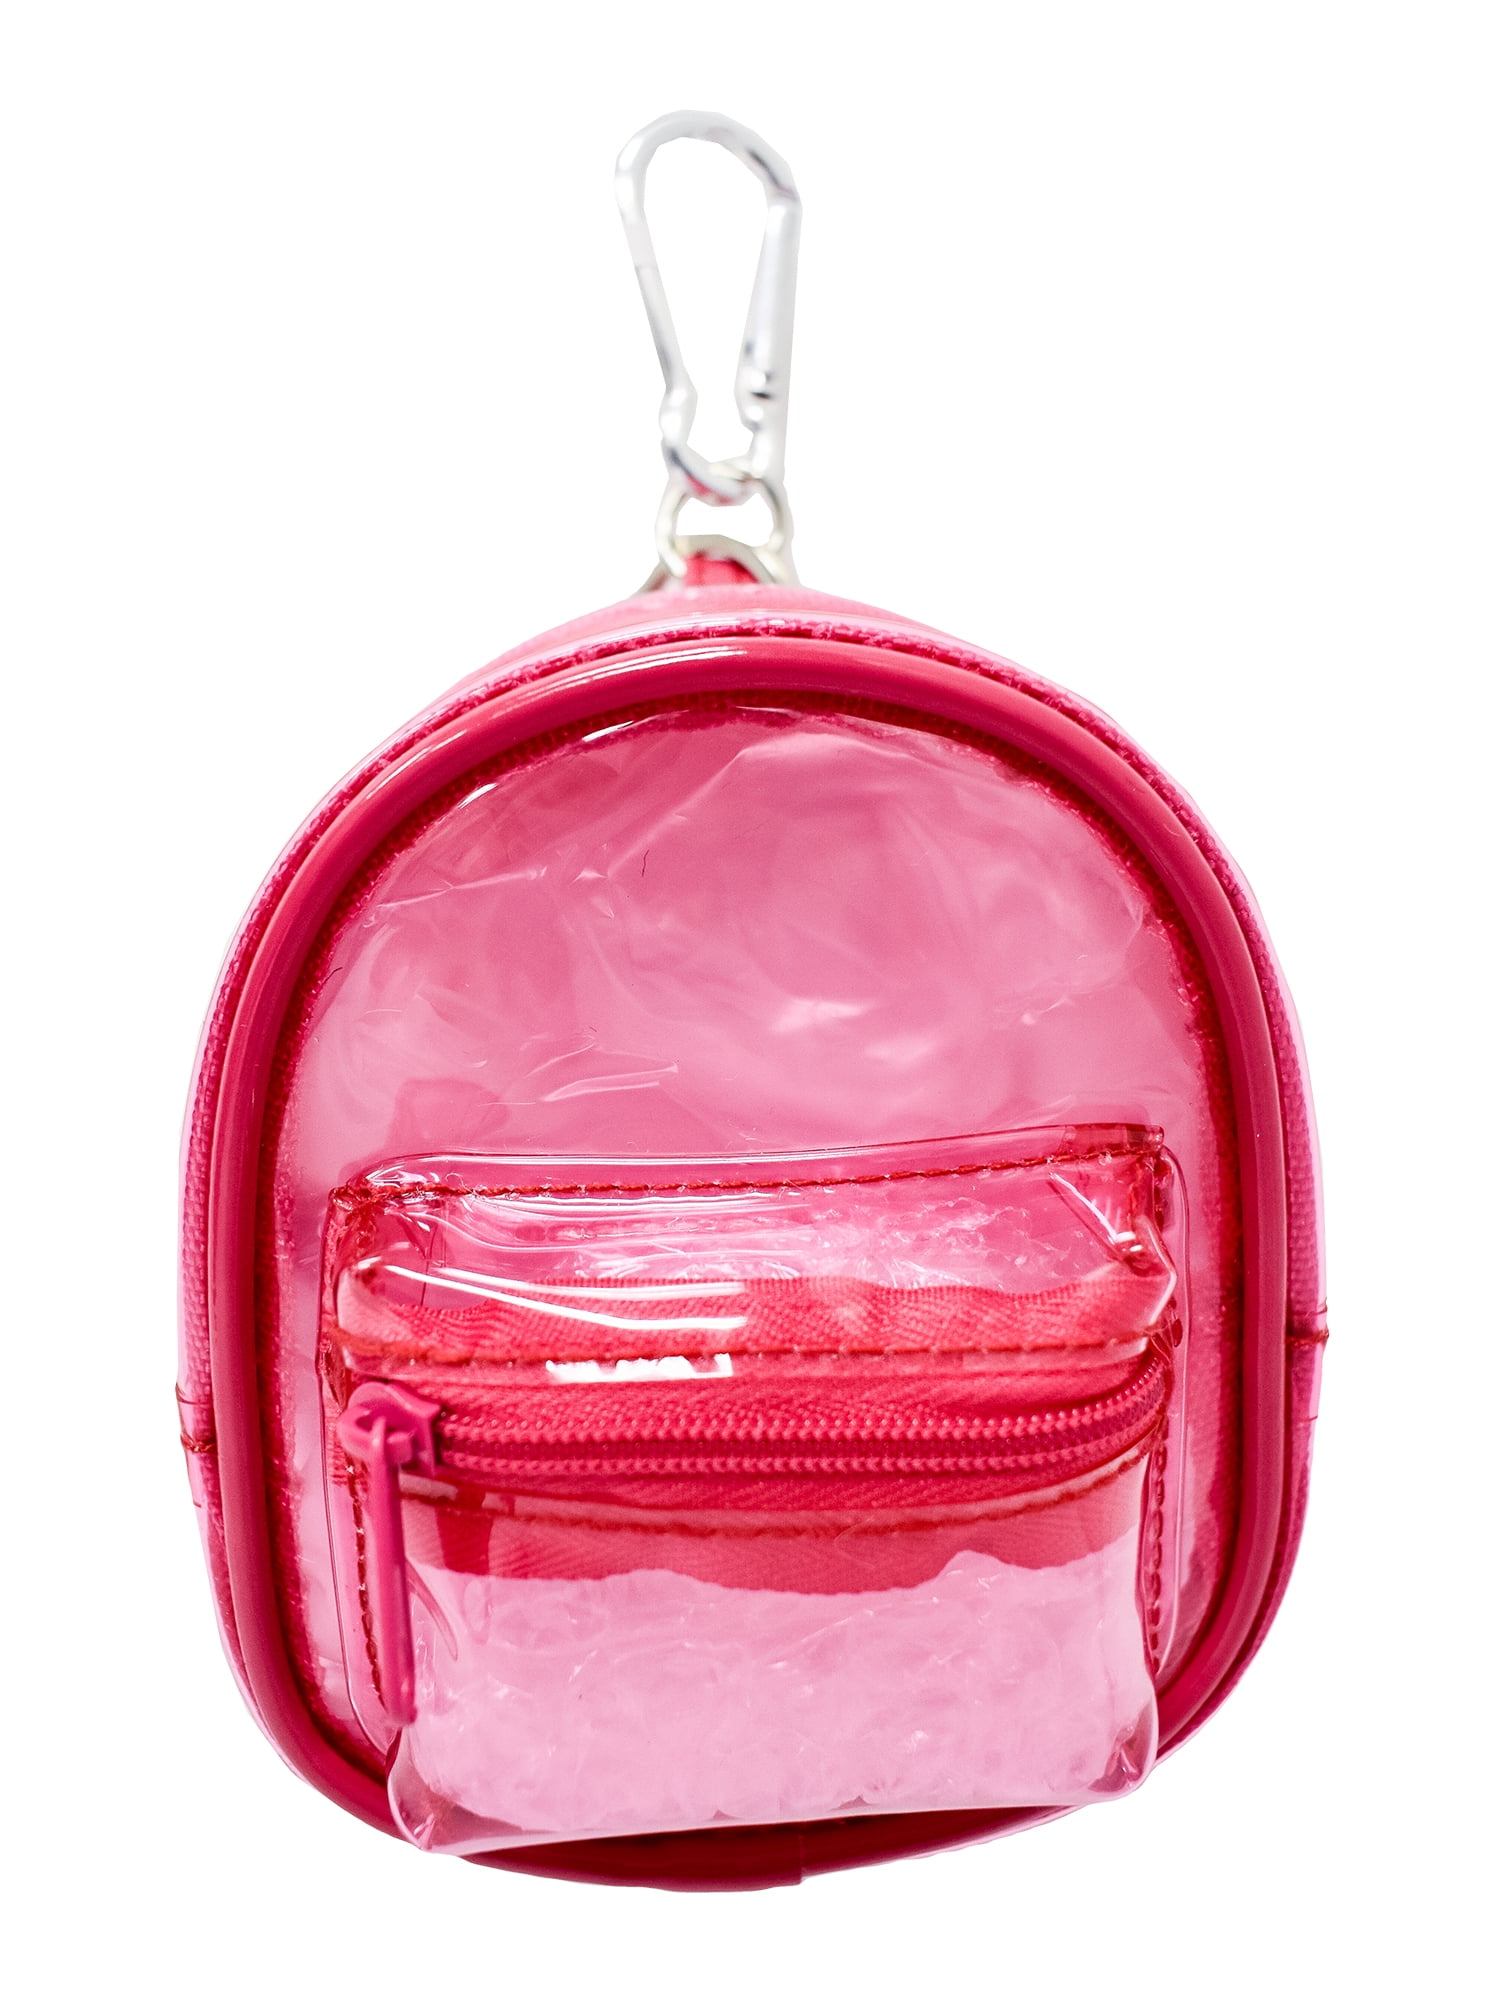 Claire’s Claire's Girls Clear Pink Mini Backpack Keychain, Cute Gift, 76113, Girl's, Size: One Size